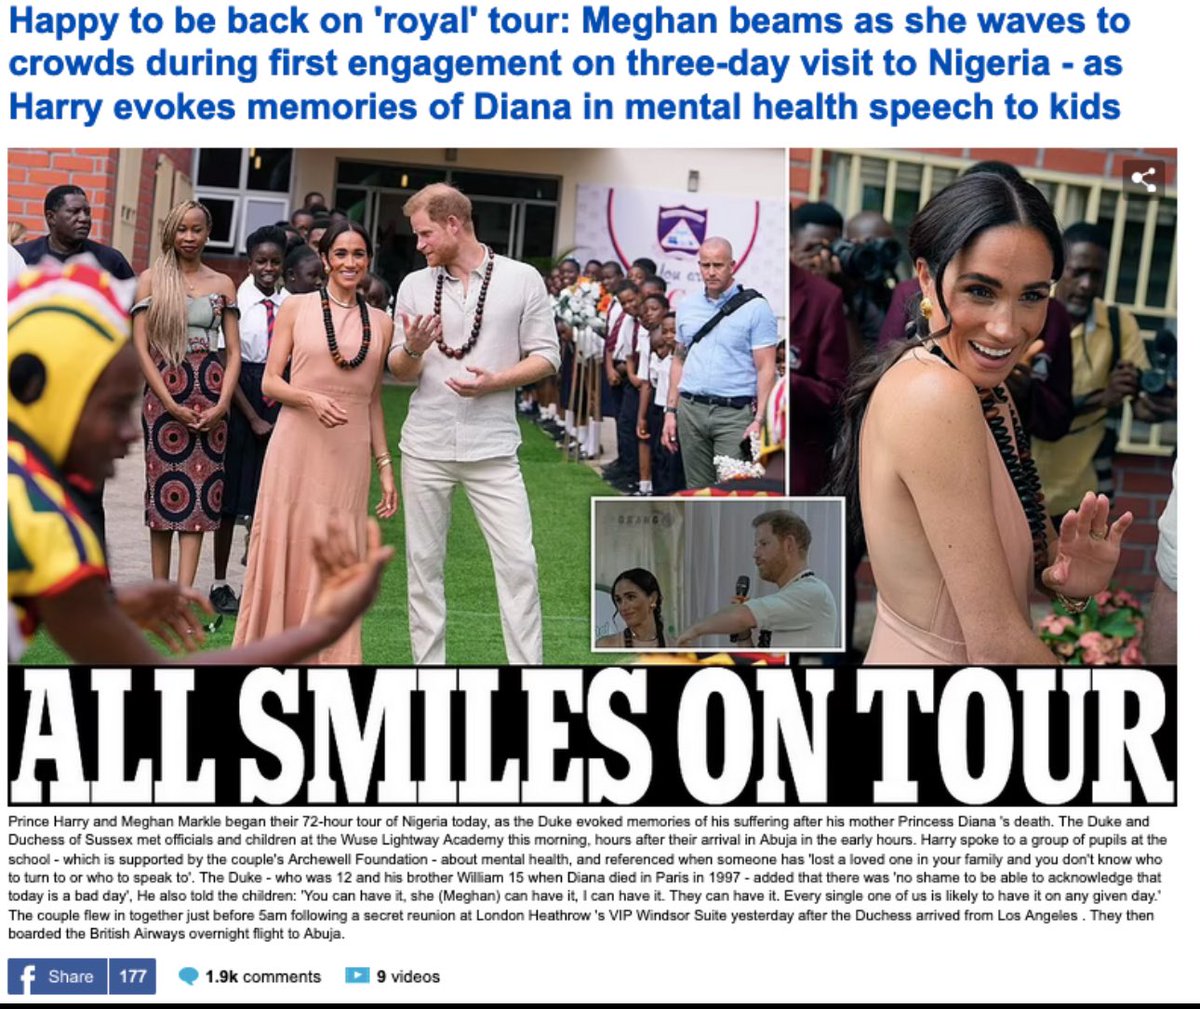 Can’t be a royal tour if they’re not representing the royals or doing work for the royals. This tour is for HARRY and MEGHAN’S international philanthropy, & has zip to do with the royal family or the UK. Sneaky how the BM tries to give the RF/UK credit. 🙄